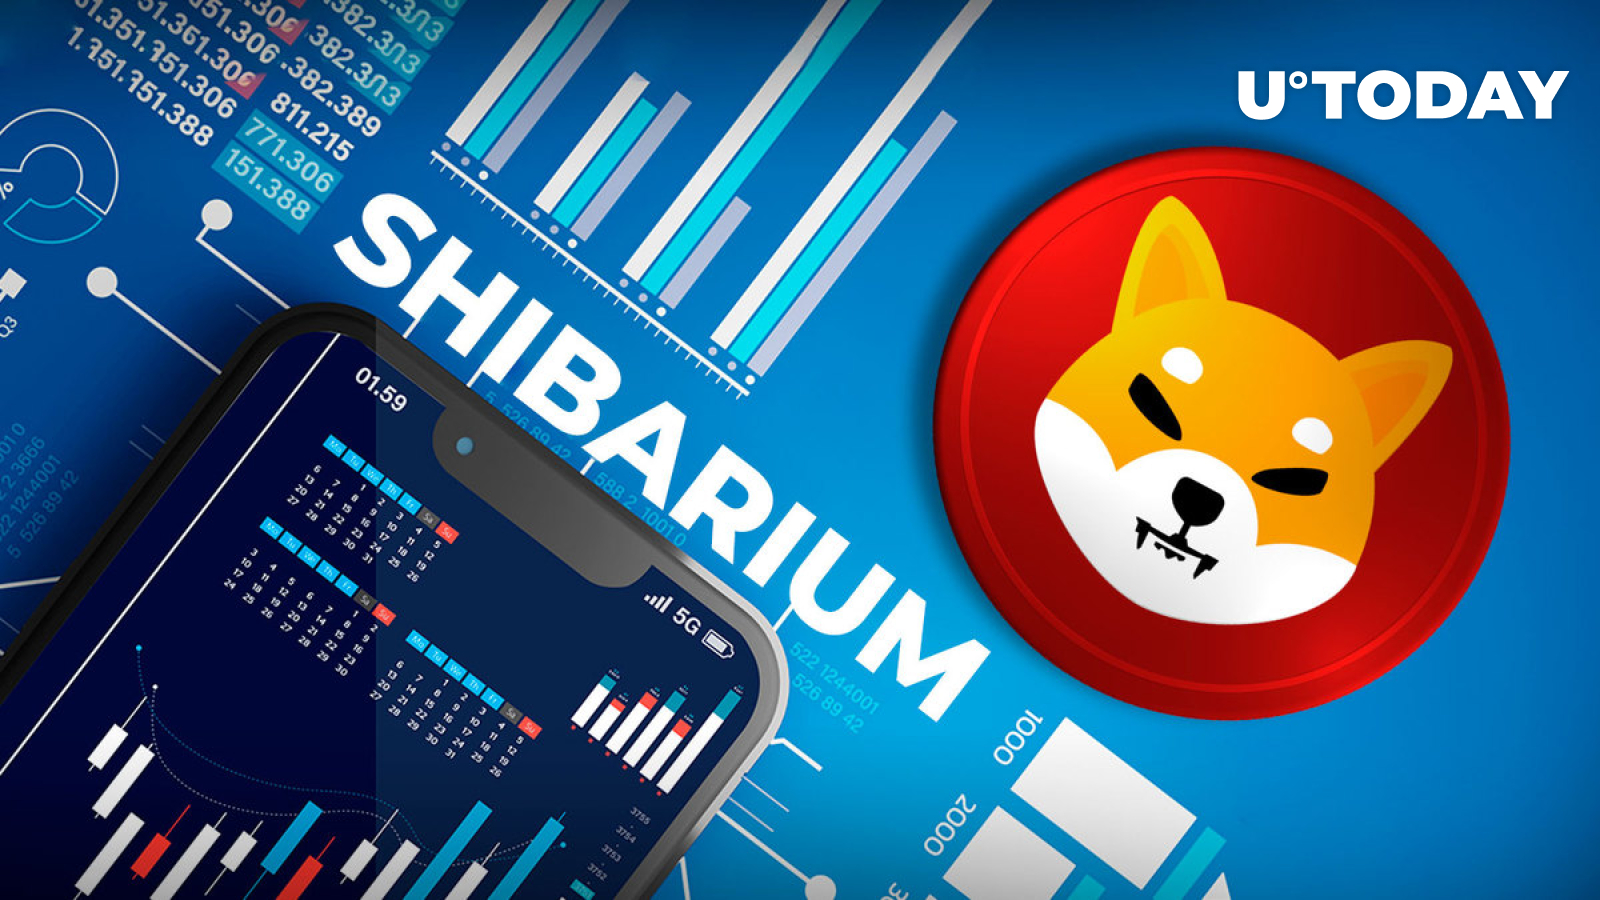 Shibarium: Thousands of Projects to Join L2 Network With Numerous Partnerships – SHIB Rep